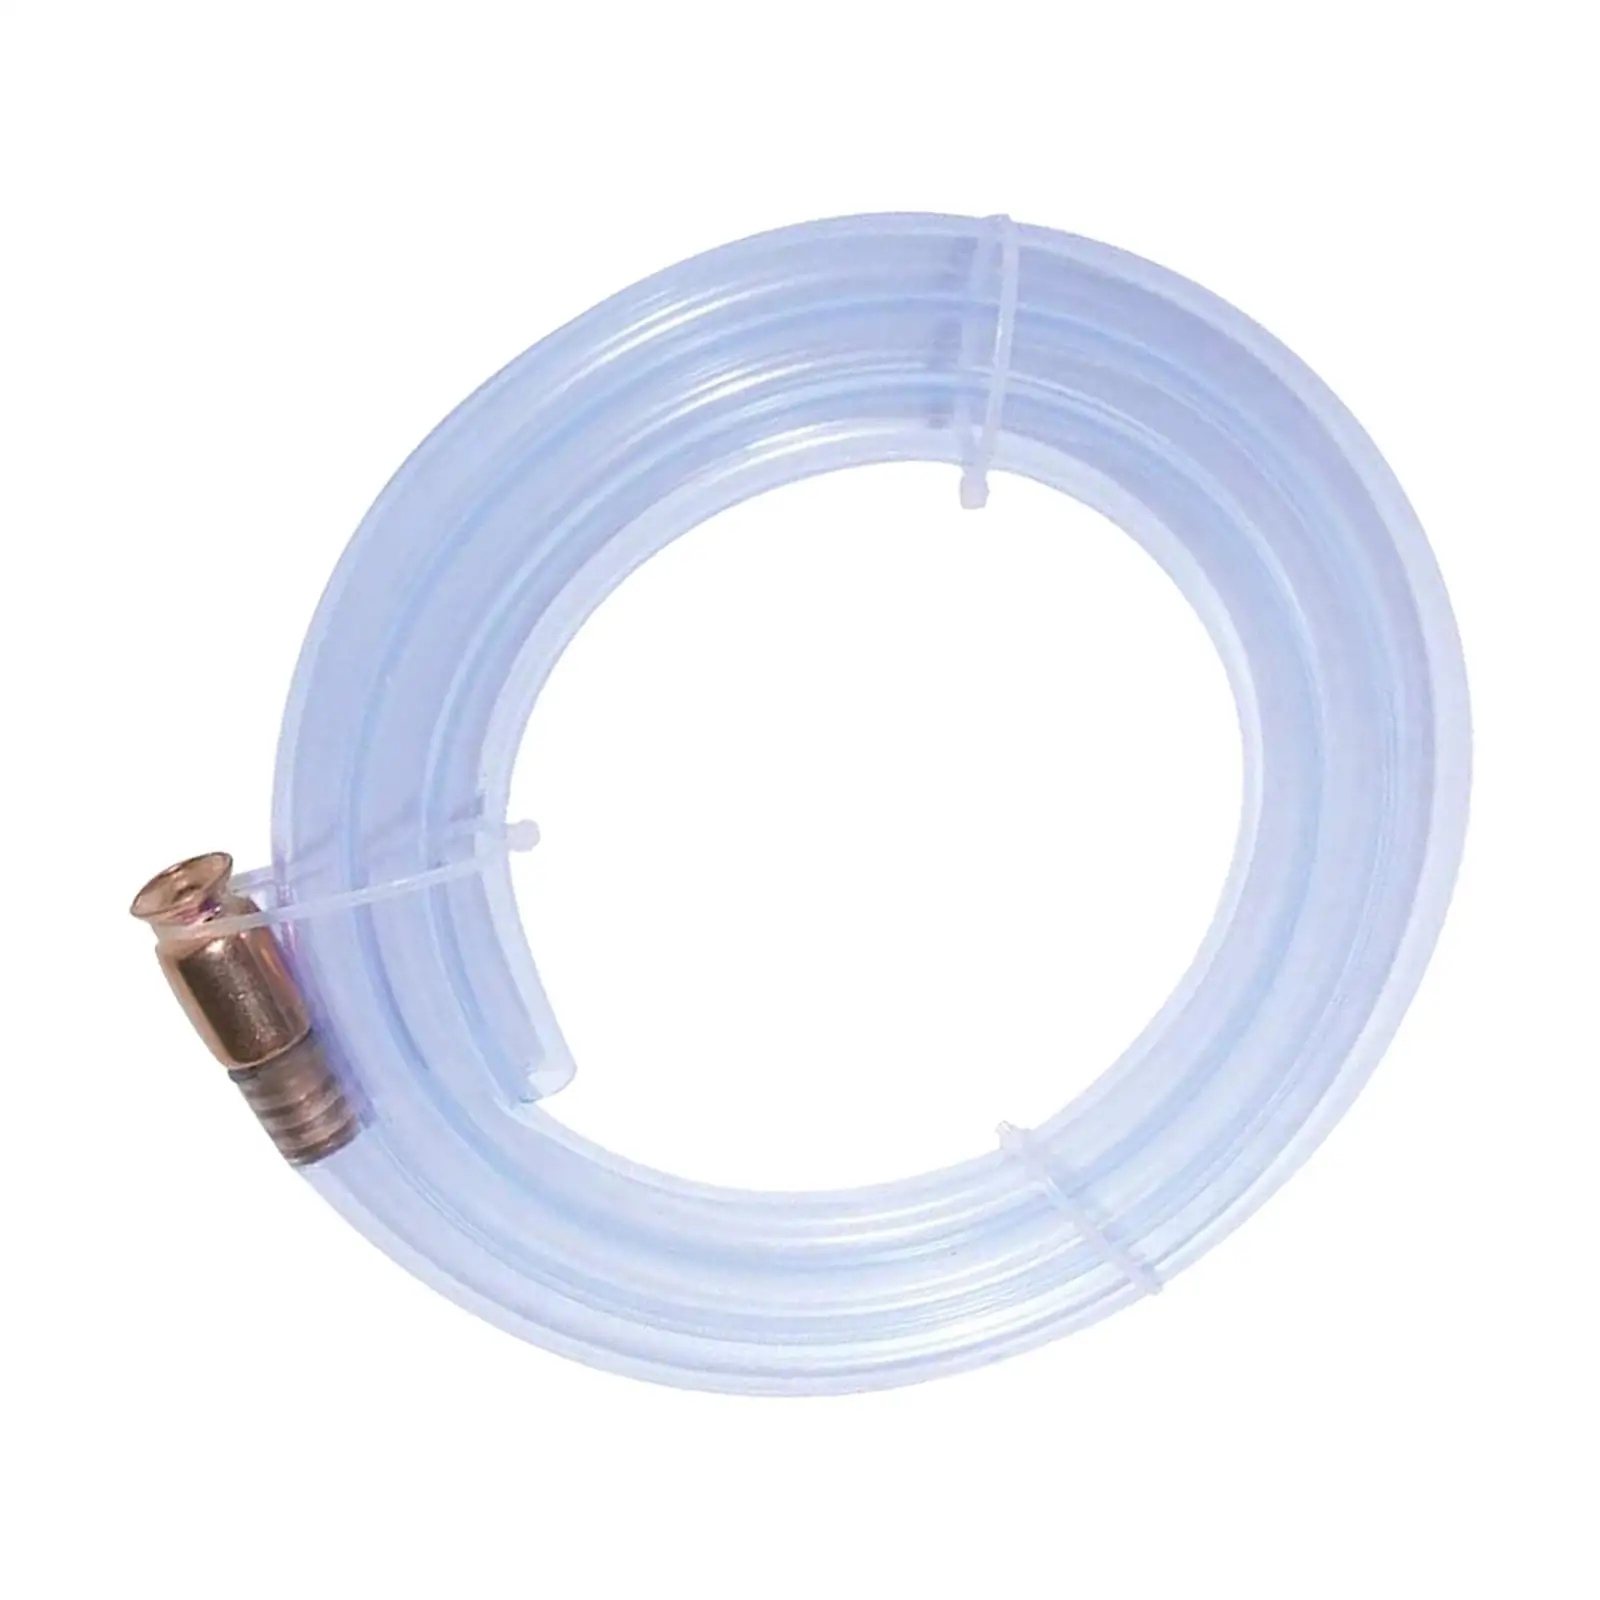 Transparent Siphon Hose 3/4 inch 118inch for Gasoline Gas Transfer Multifunctional Universal Transferring Tool Pump Transfer